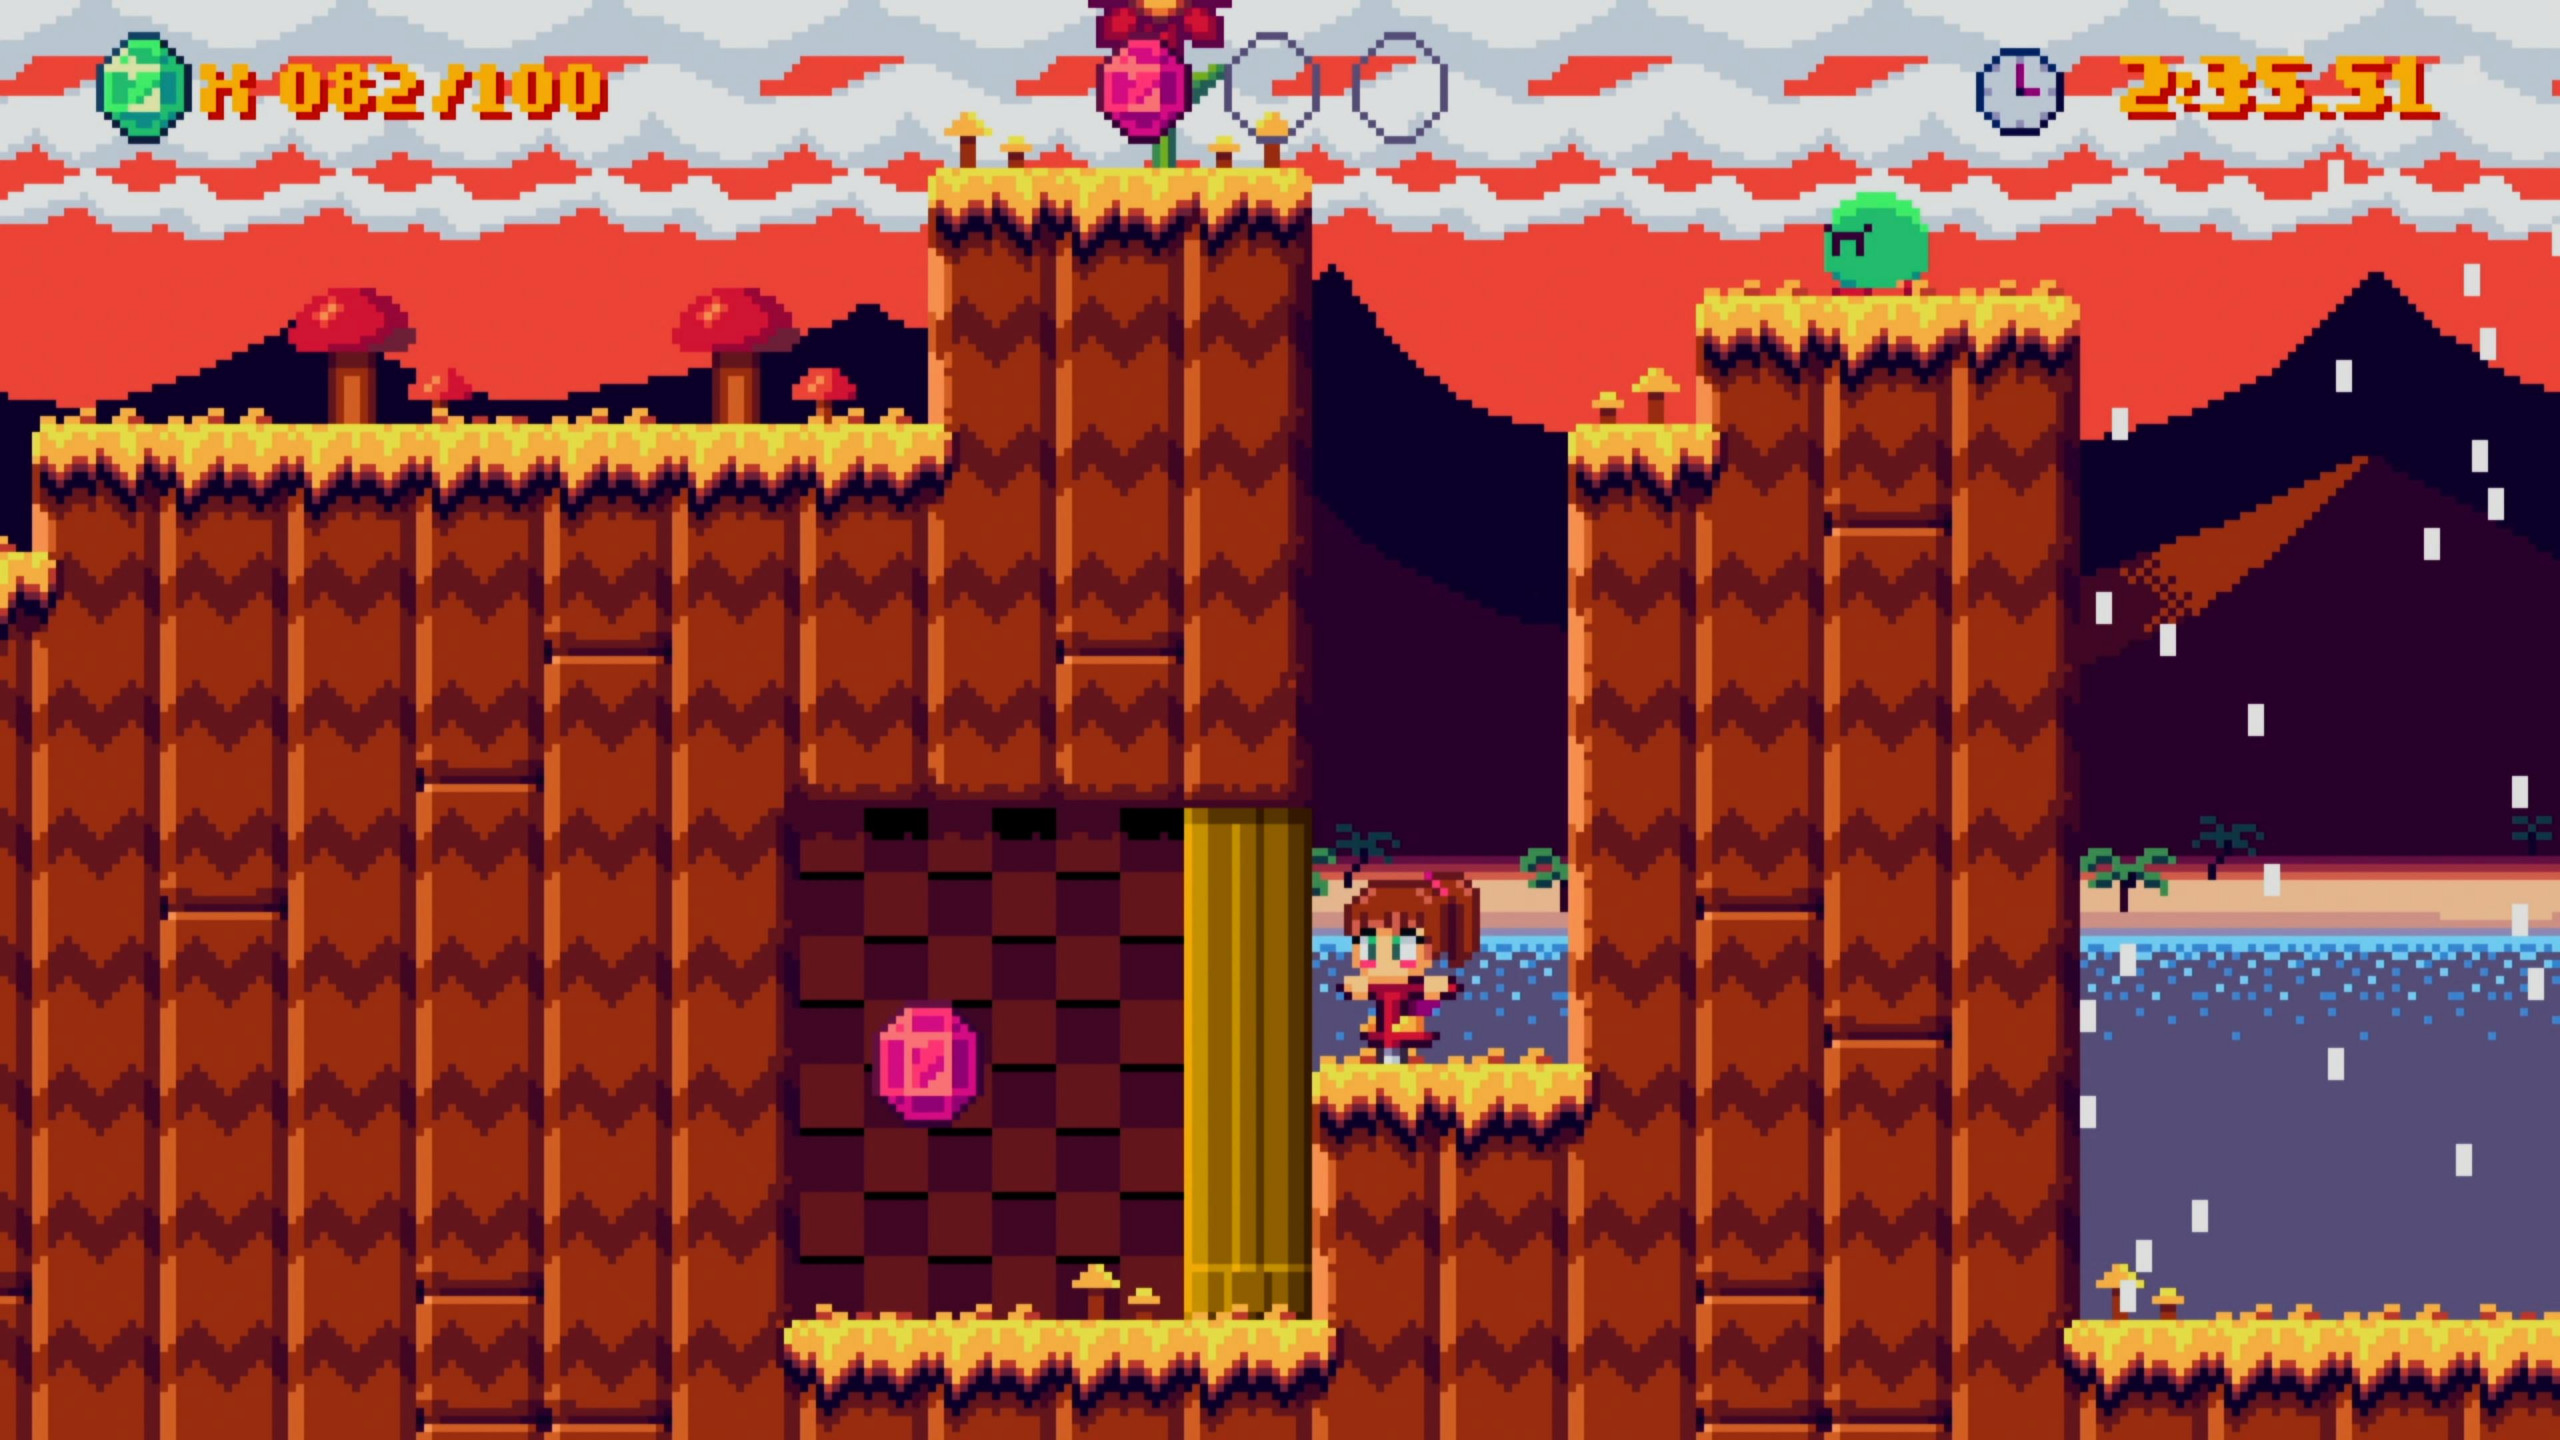 PogoGirl faces a secret area that is locked by a gold pillar which is blocking access to collecting a pink gem. The environment around features brown hills with yellow grass depicting autumn. On top of the hill to her left is a small round green enemy that looks angry